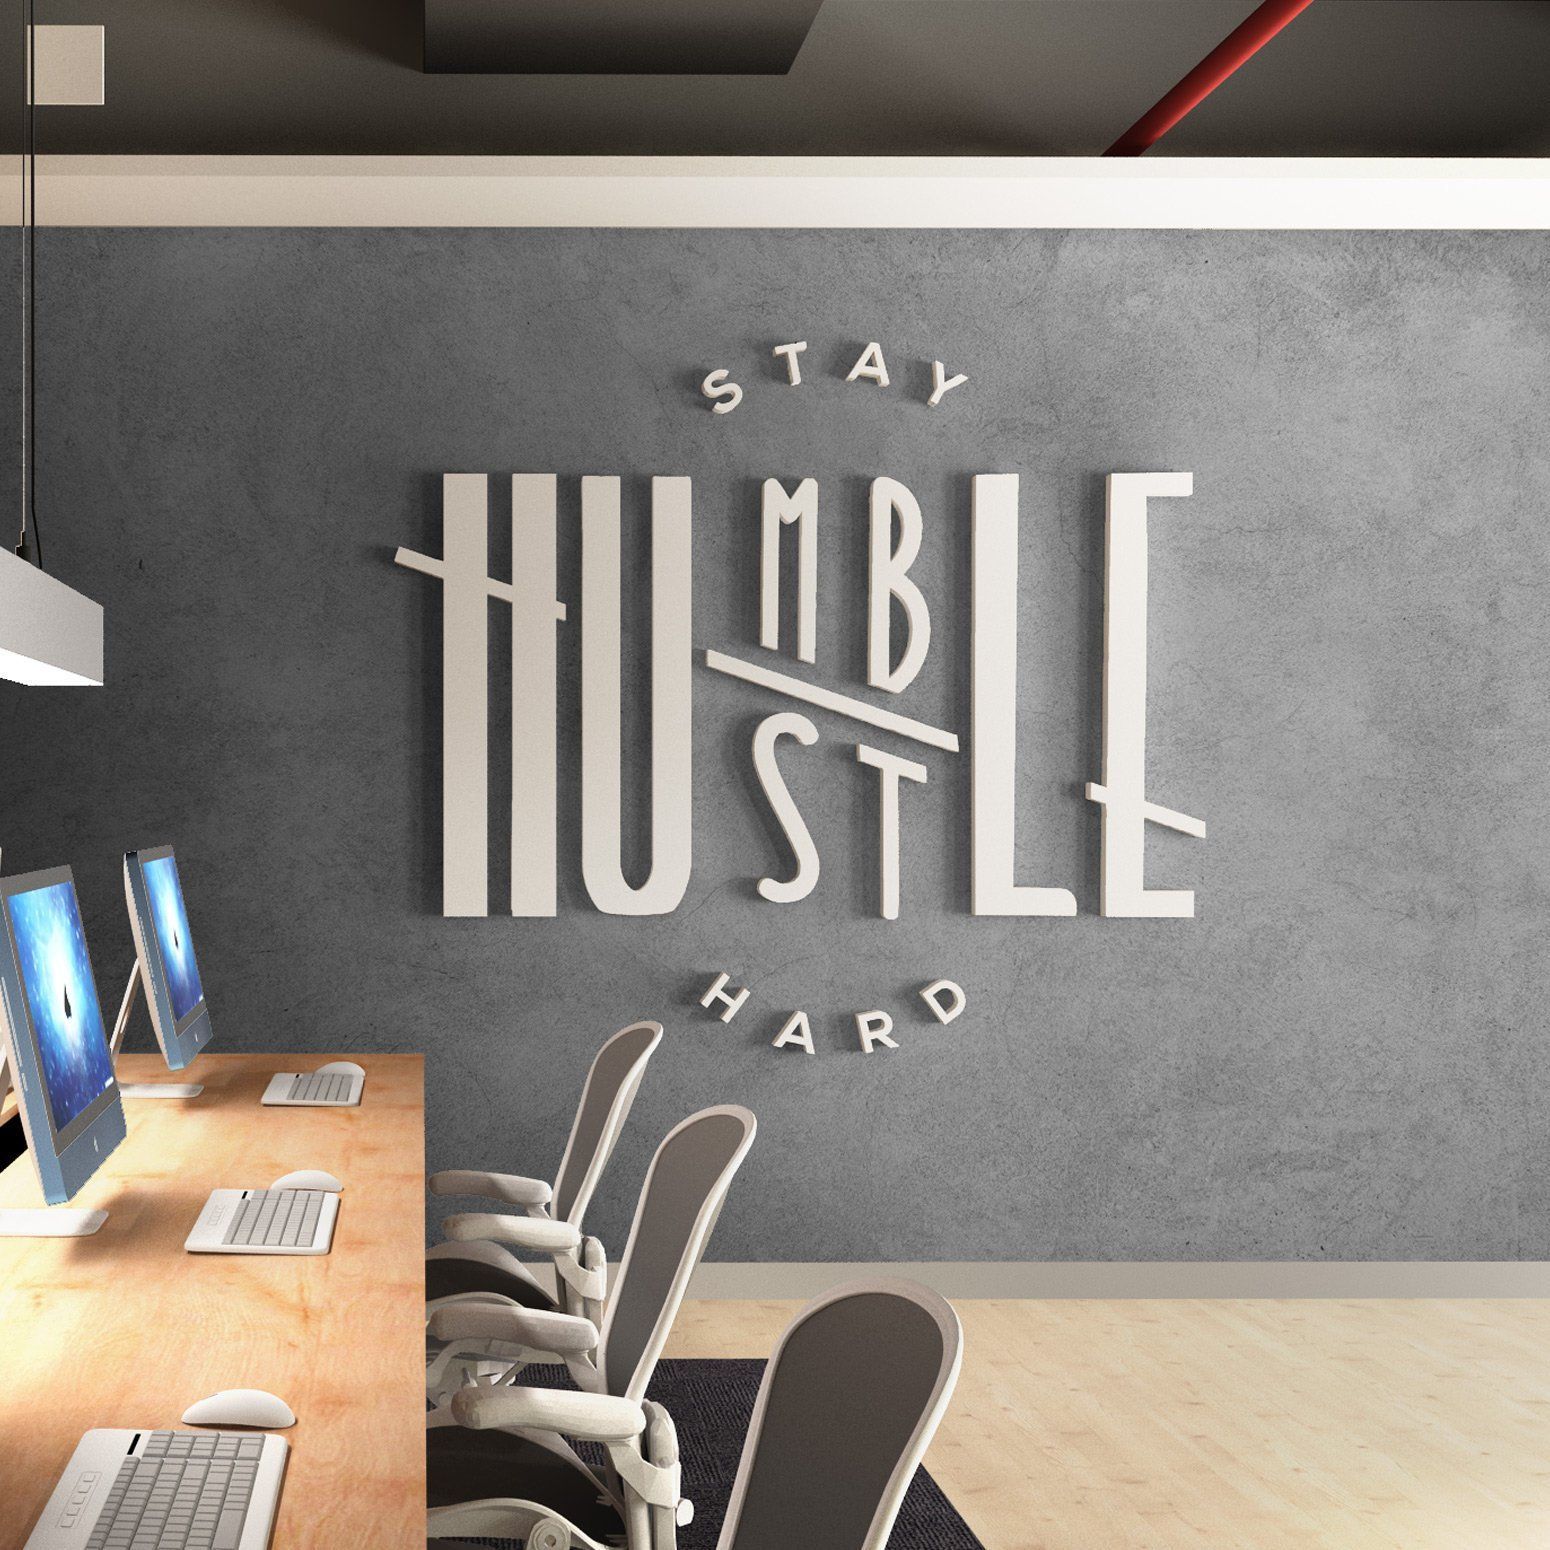 Stay Humble , Hustle Hard , Dimensional letters business office Quote - SKU:STHH - Stay Humble , Hustle Hard , Dimensional letters business office Quote - SKU:STHH -   16 fitness Office space ideas